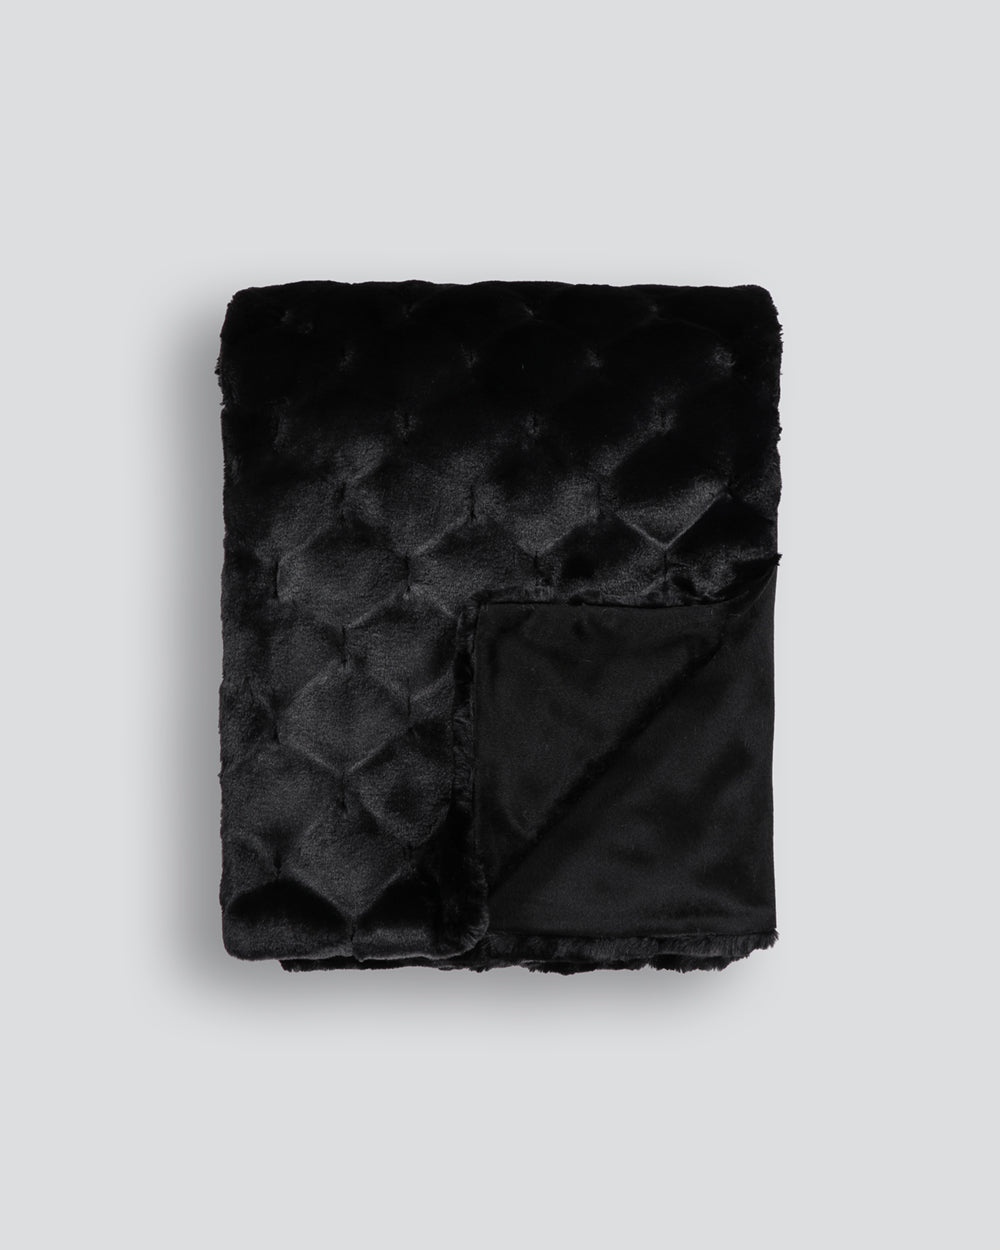 Heirloom Valentina Black Throw Rug Blanket in Faux Fur is available from Make Your House A Home Premium Stockist. Furniture Store Bendigo, Victoria. Australia Wide Delivery.